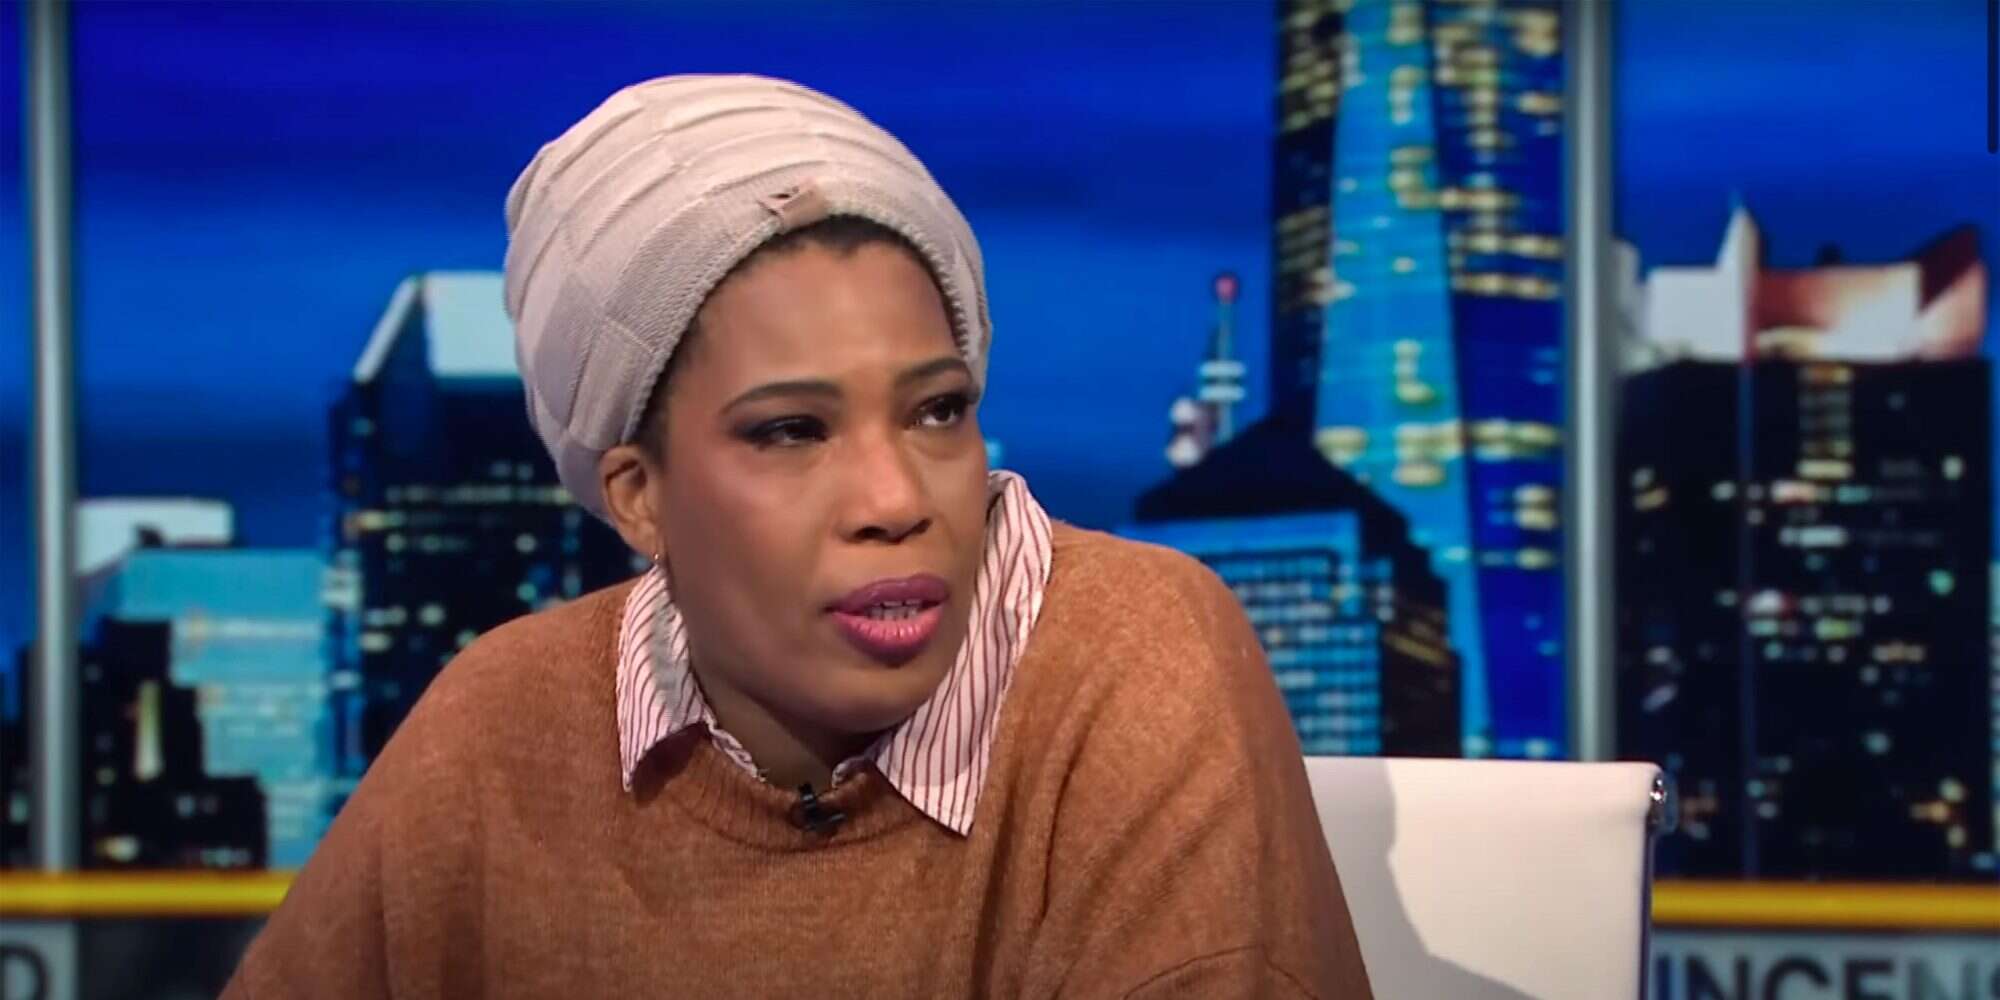 Macy Gray accused of transphobic remarks after Piers Morgan interview